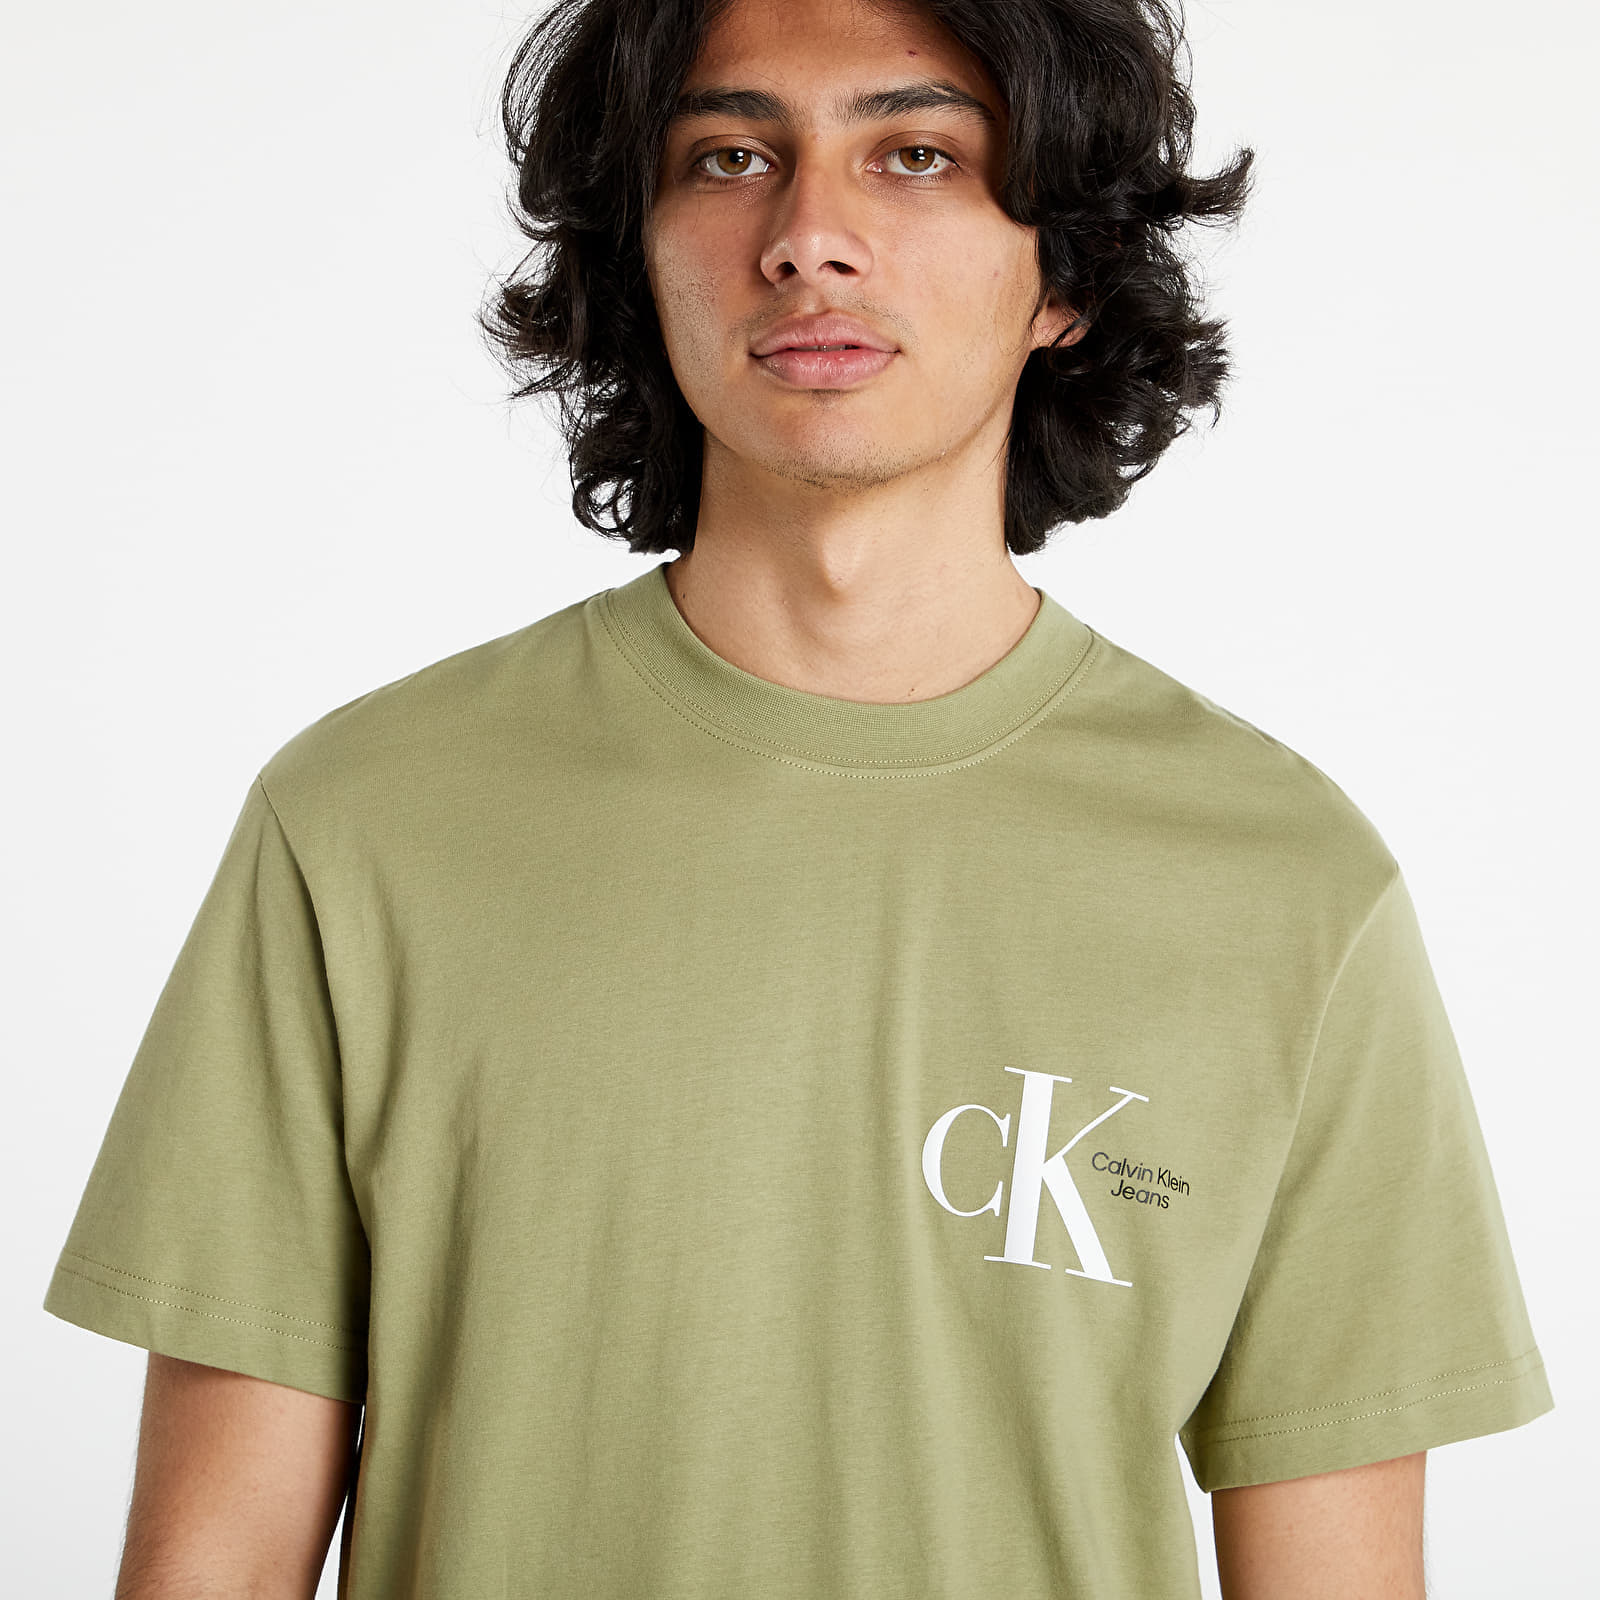 T-Shirts CALVIN JEANS Olive Tee KLEIN Back Dynamic | Ck Faded Graphic Queens